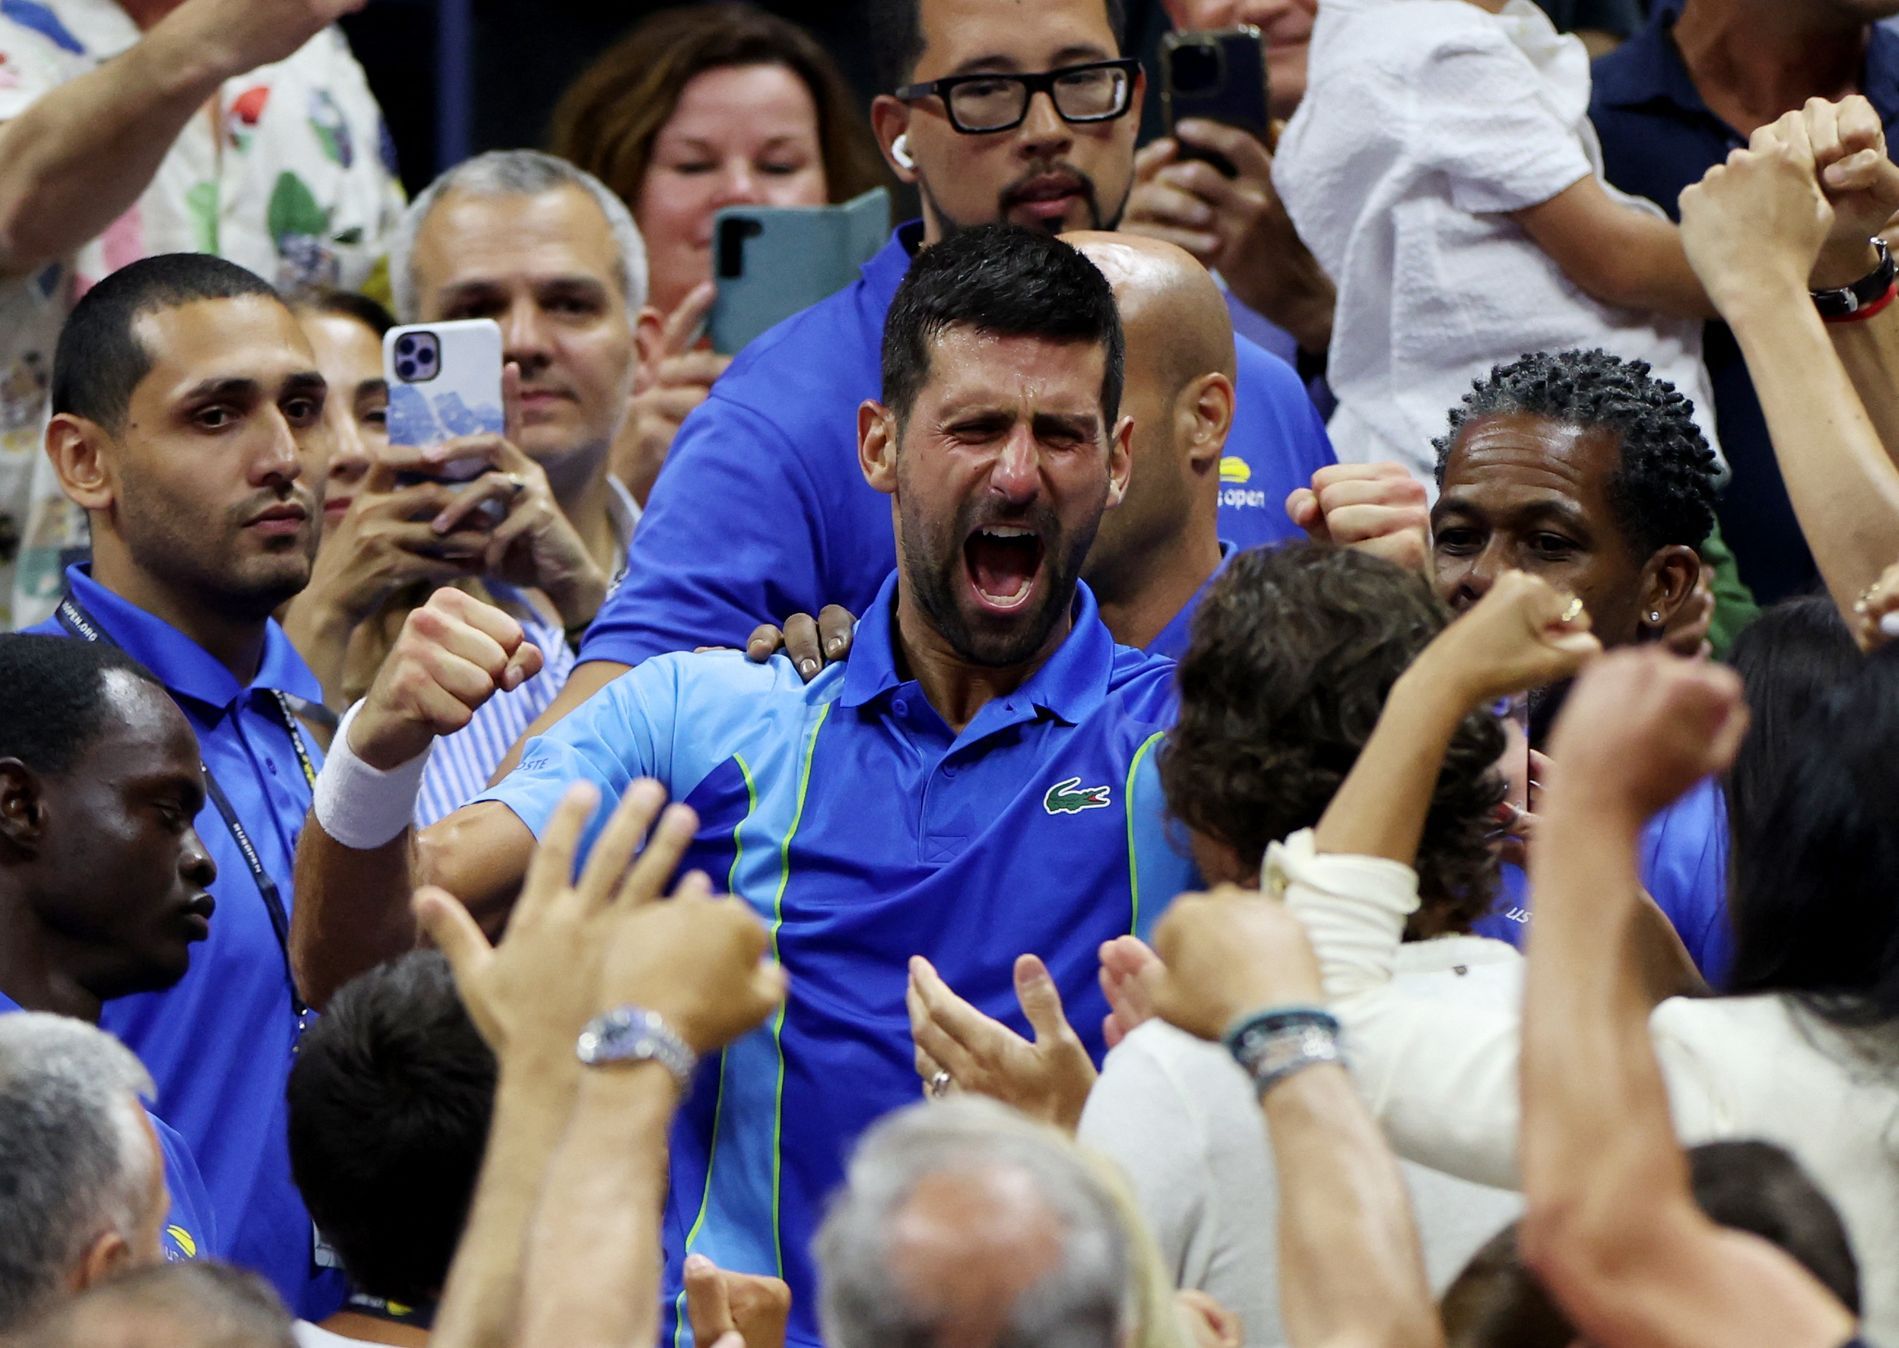 Novak Djokovic Wins Fourth US Open and Equals Margaret Court’s Grand Slam Record